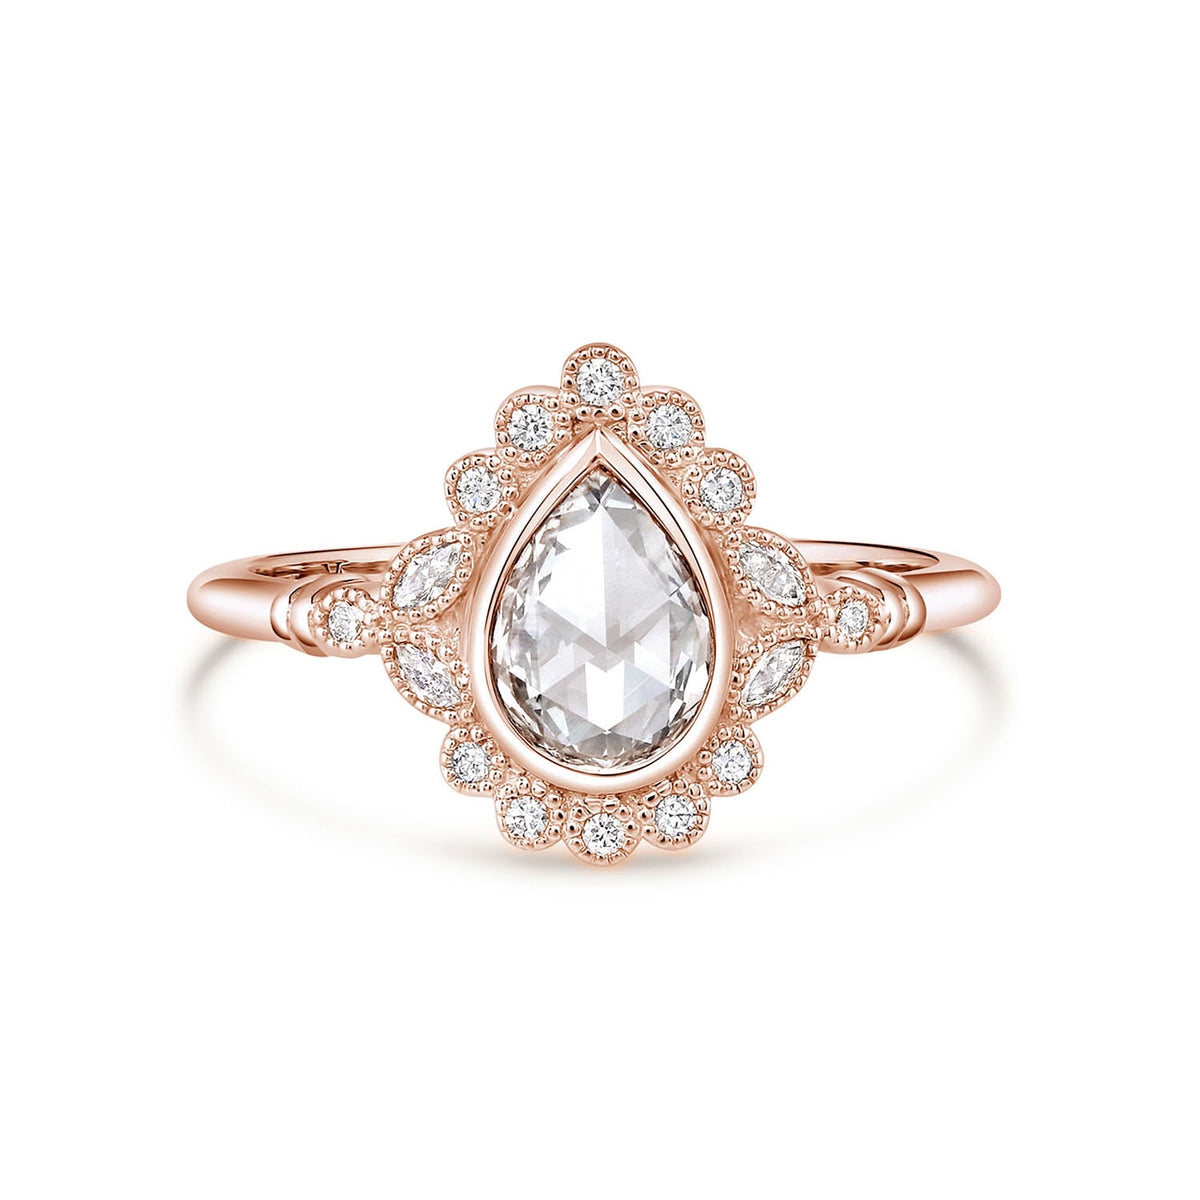 Everly Ring